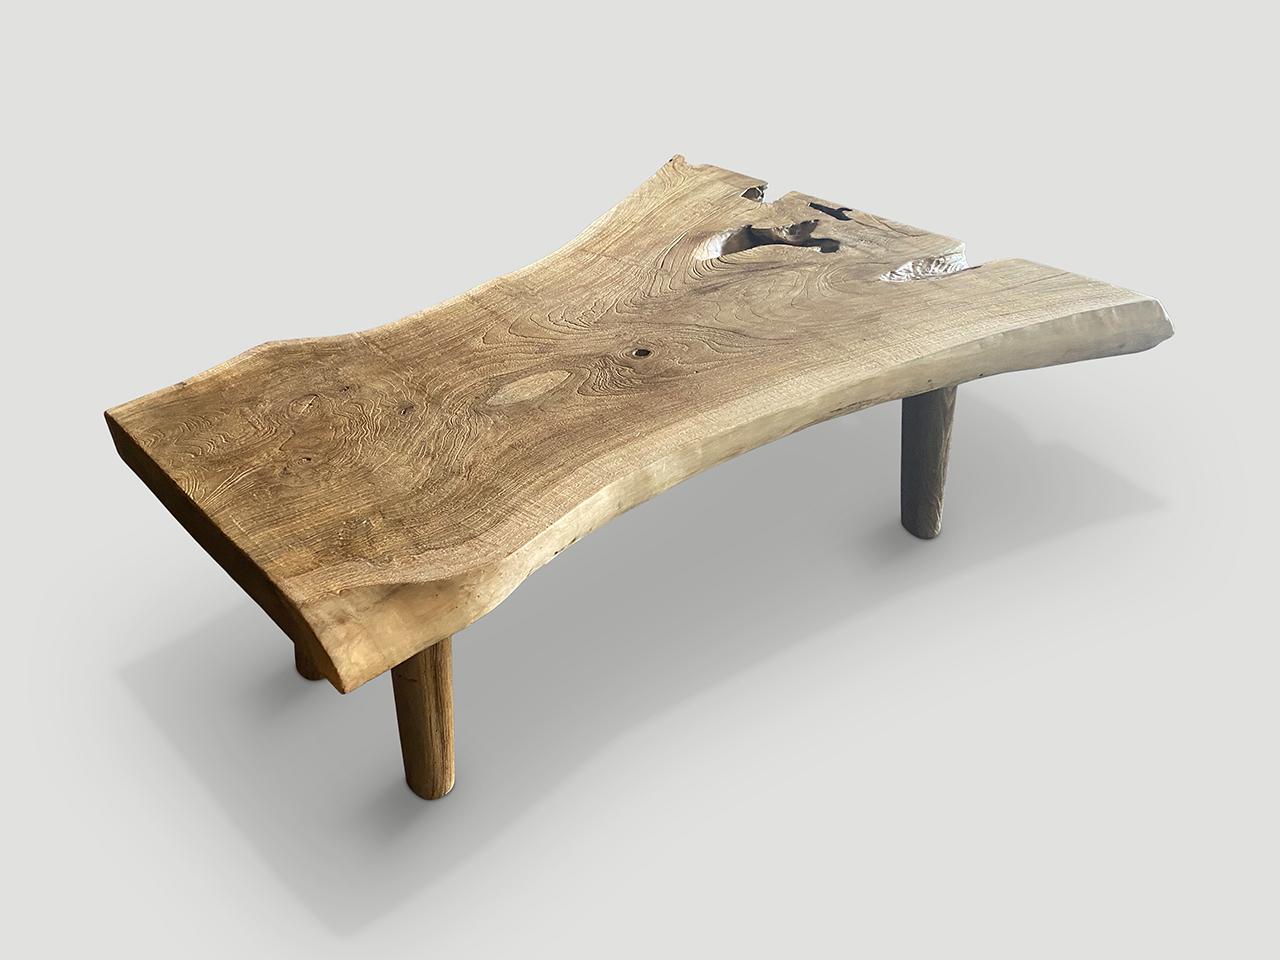 Andrianna Shamaris Live Edge Teak Wood Coffee Table In Excellent Condition For Sale In New York, NY